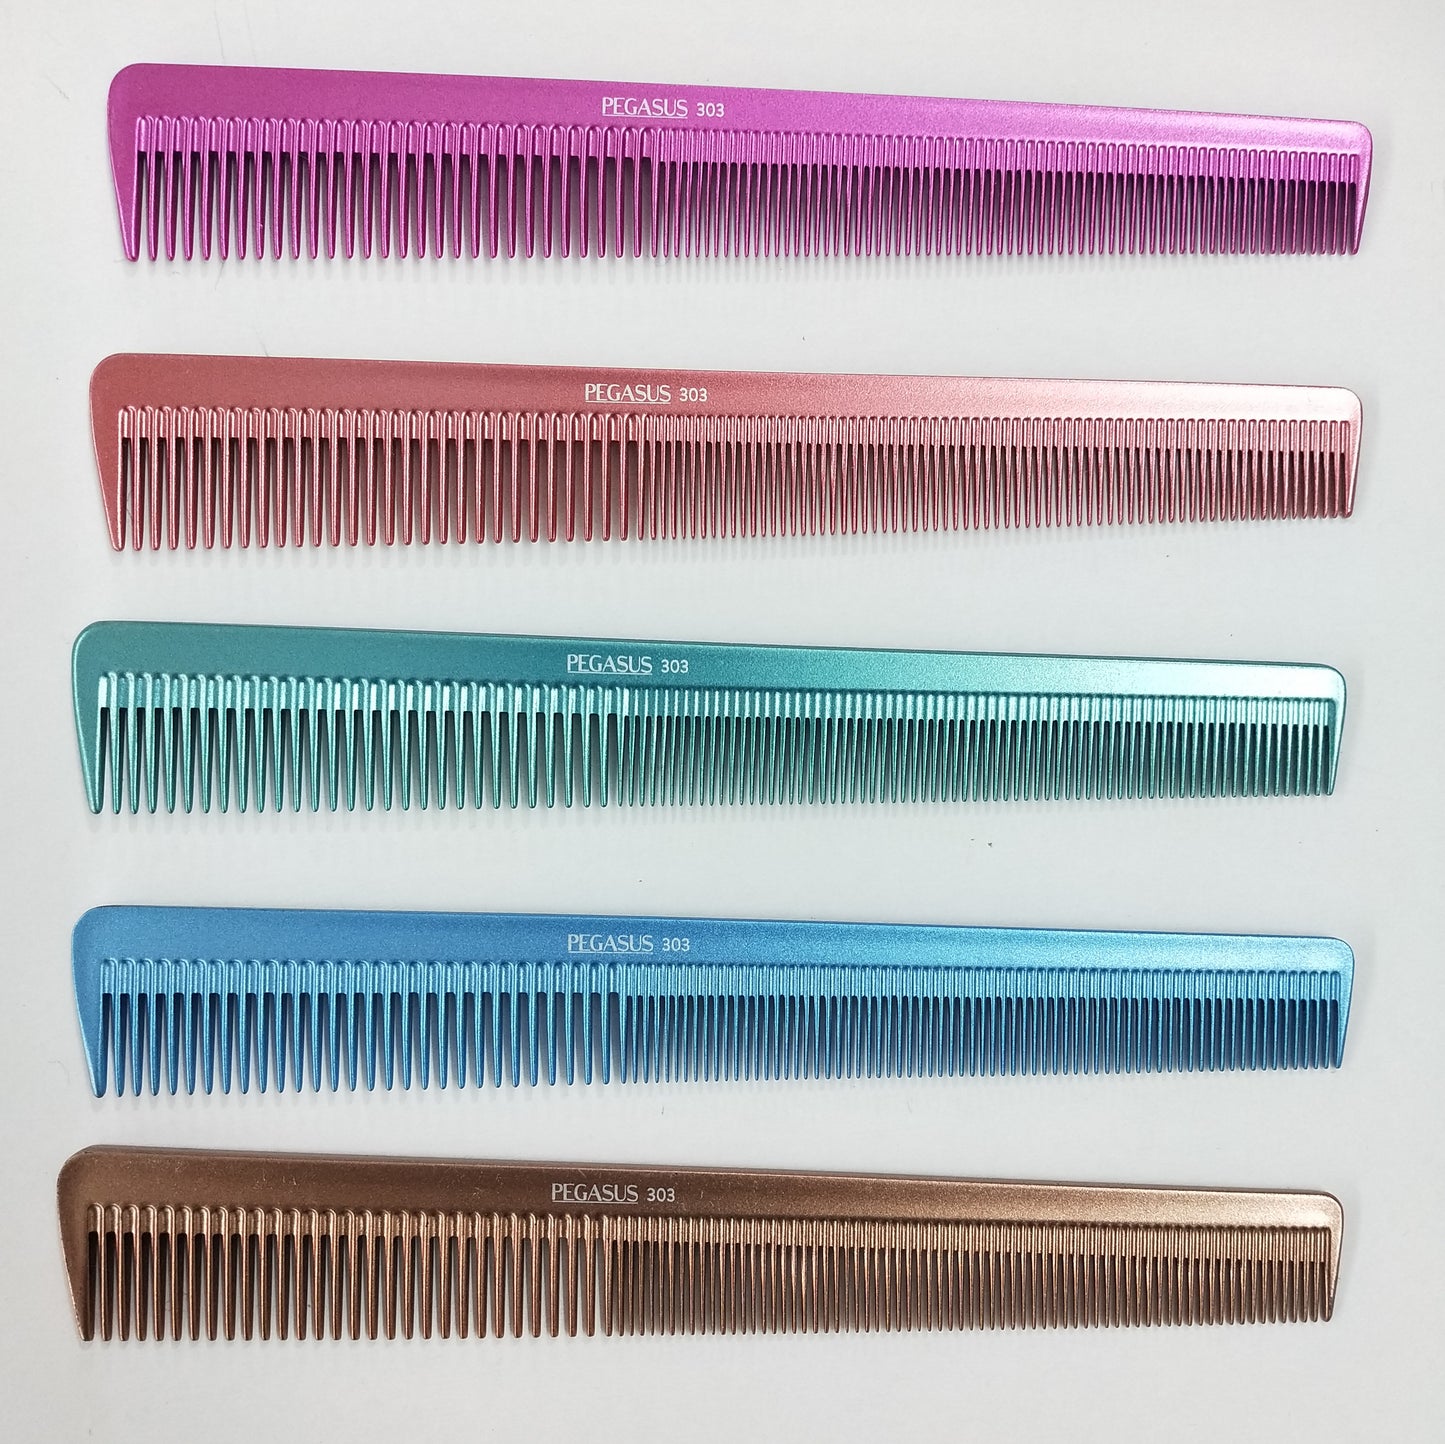 Pegasus MICOLOR 303, 6.5in Hard Rubber Heavy Barber Comb, Handmade, Seamless, Smooth Edges, Anti Static, Heat and Chemically Resistant, Wet Hair, Everyday Grooming Comb | Peines de goma dura - Blue